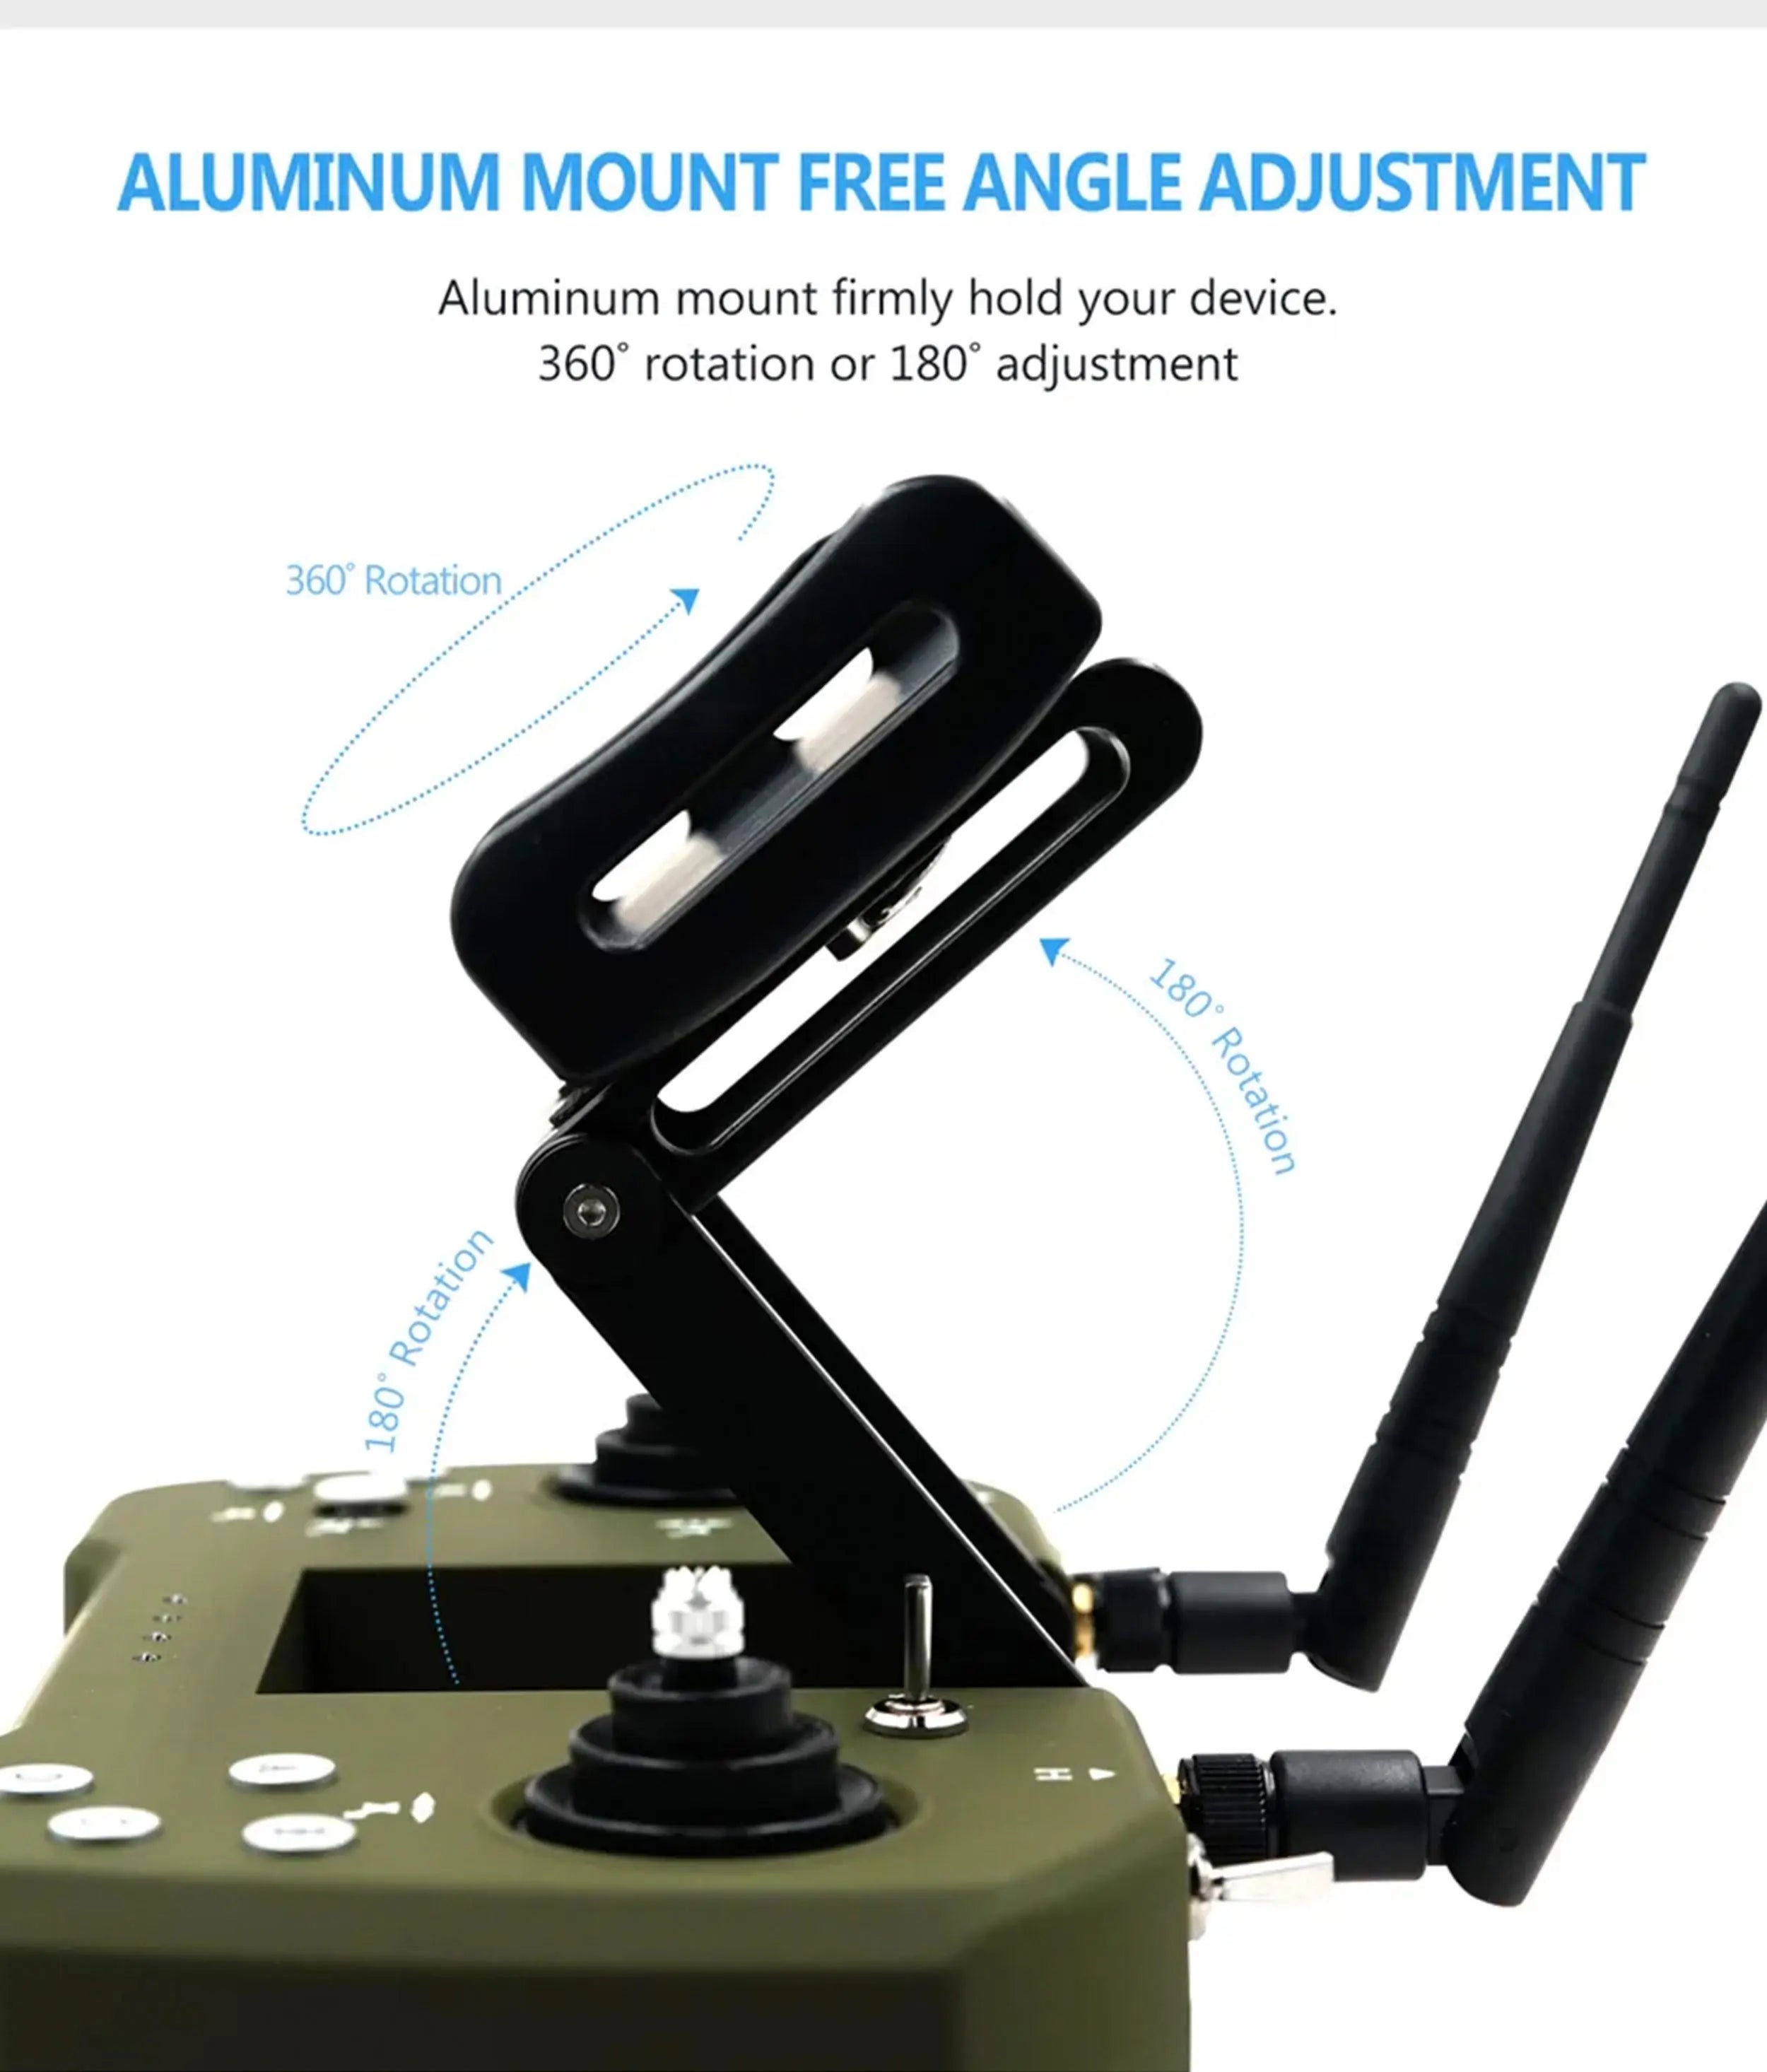 Skydroid M12L, Adjustable aluminum mount for secure device holding with 360° rotation and 180° tilt.